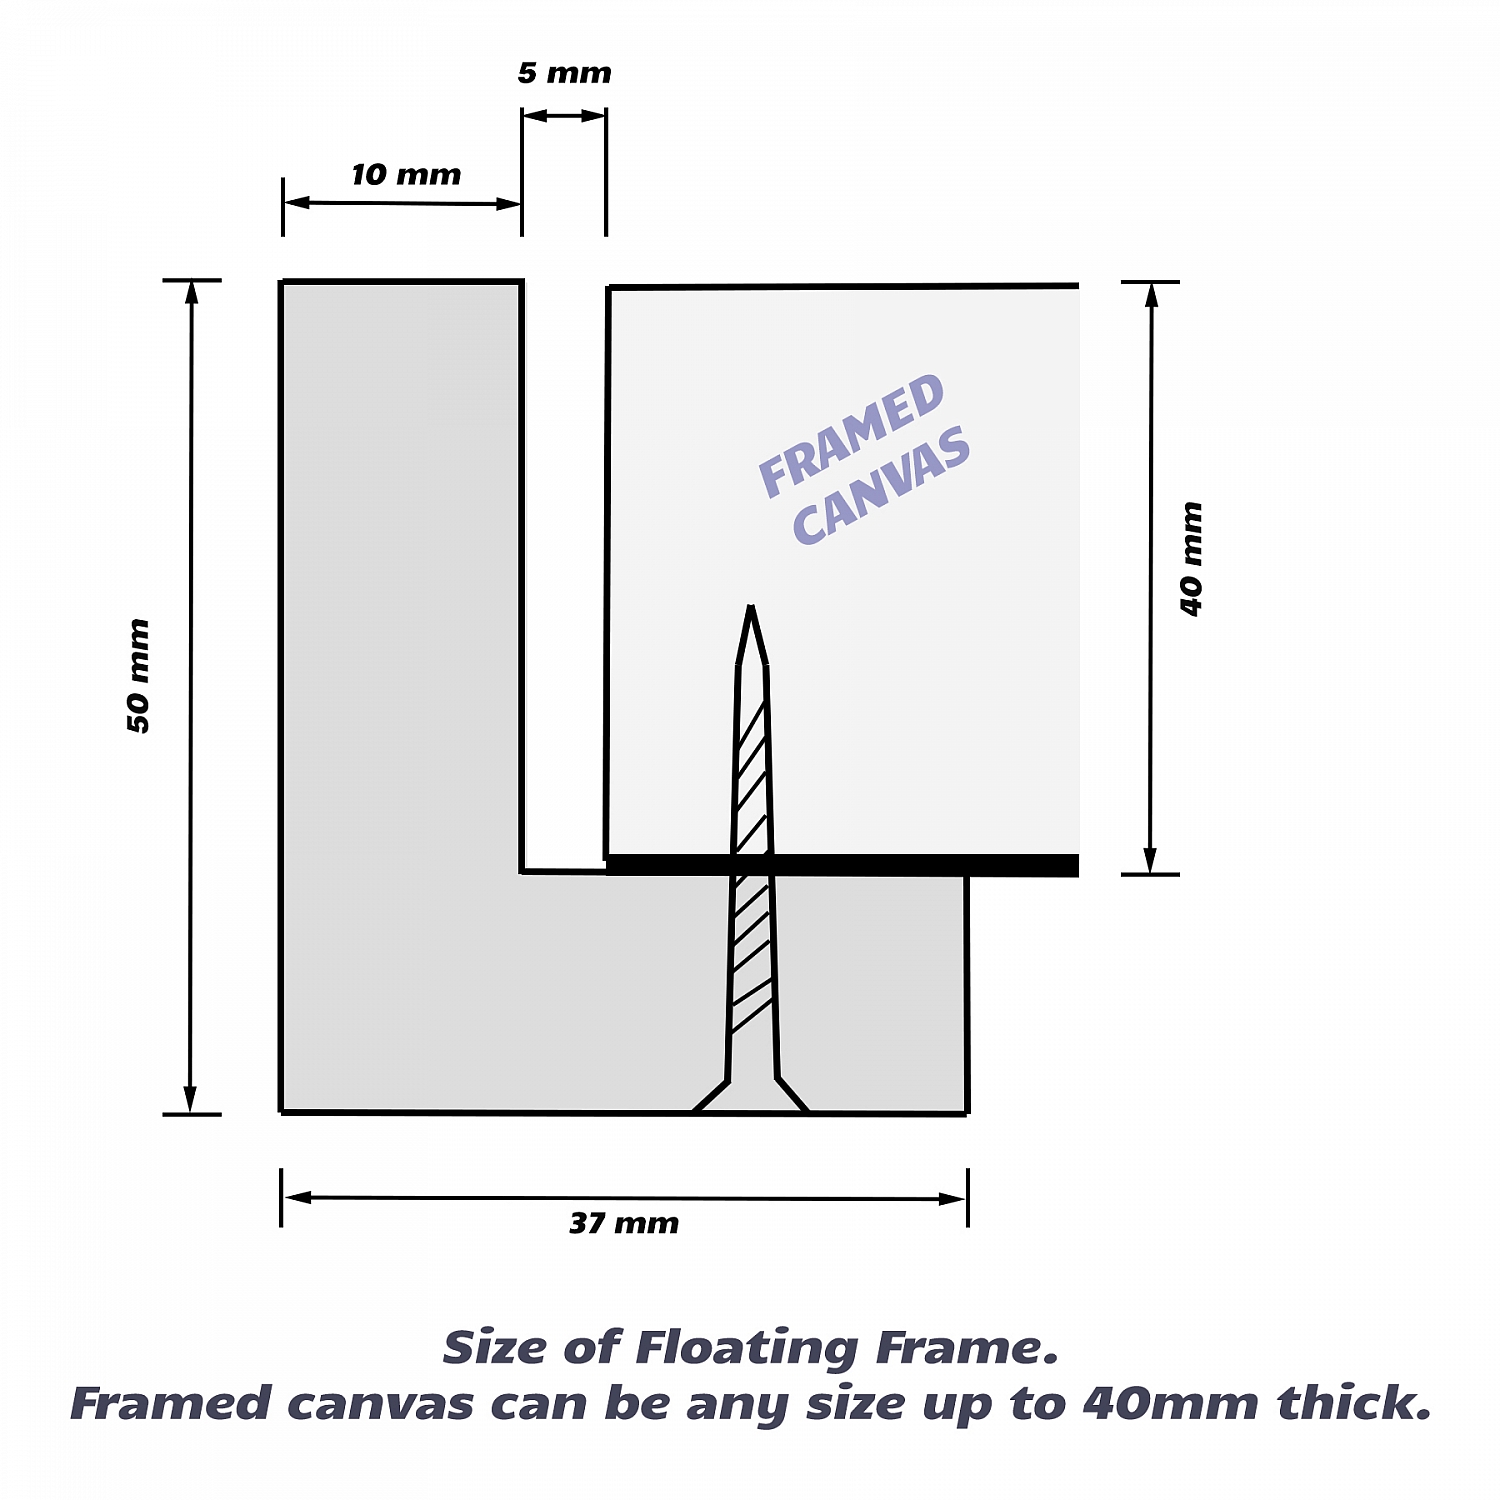 Prime - Float Tobacco Moulding Frame (Shadow Box Frame), DIY Canvas kit | Drawing_for_floating_frame_with_40mm_canvas.jpg